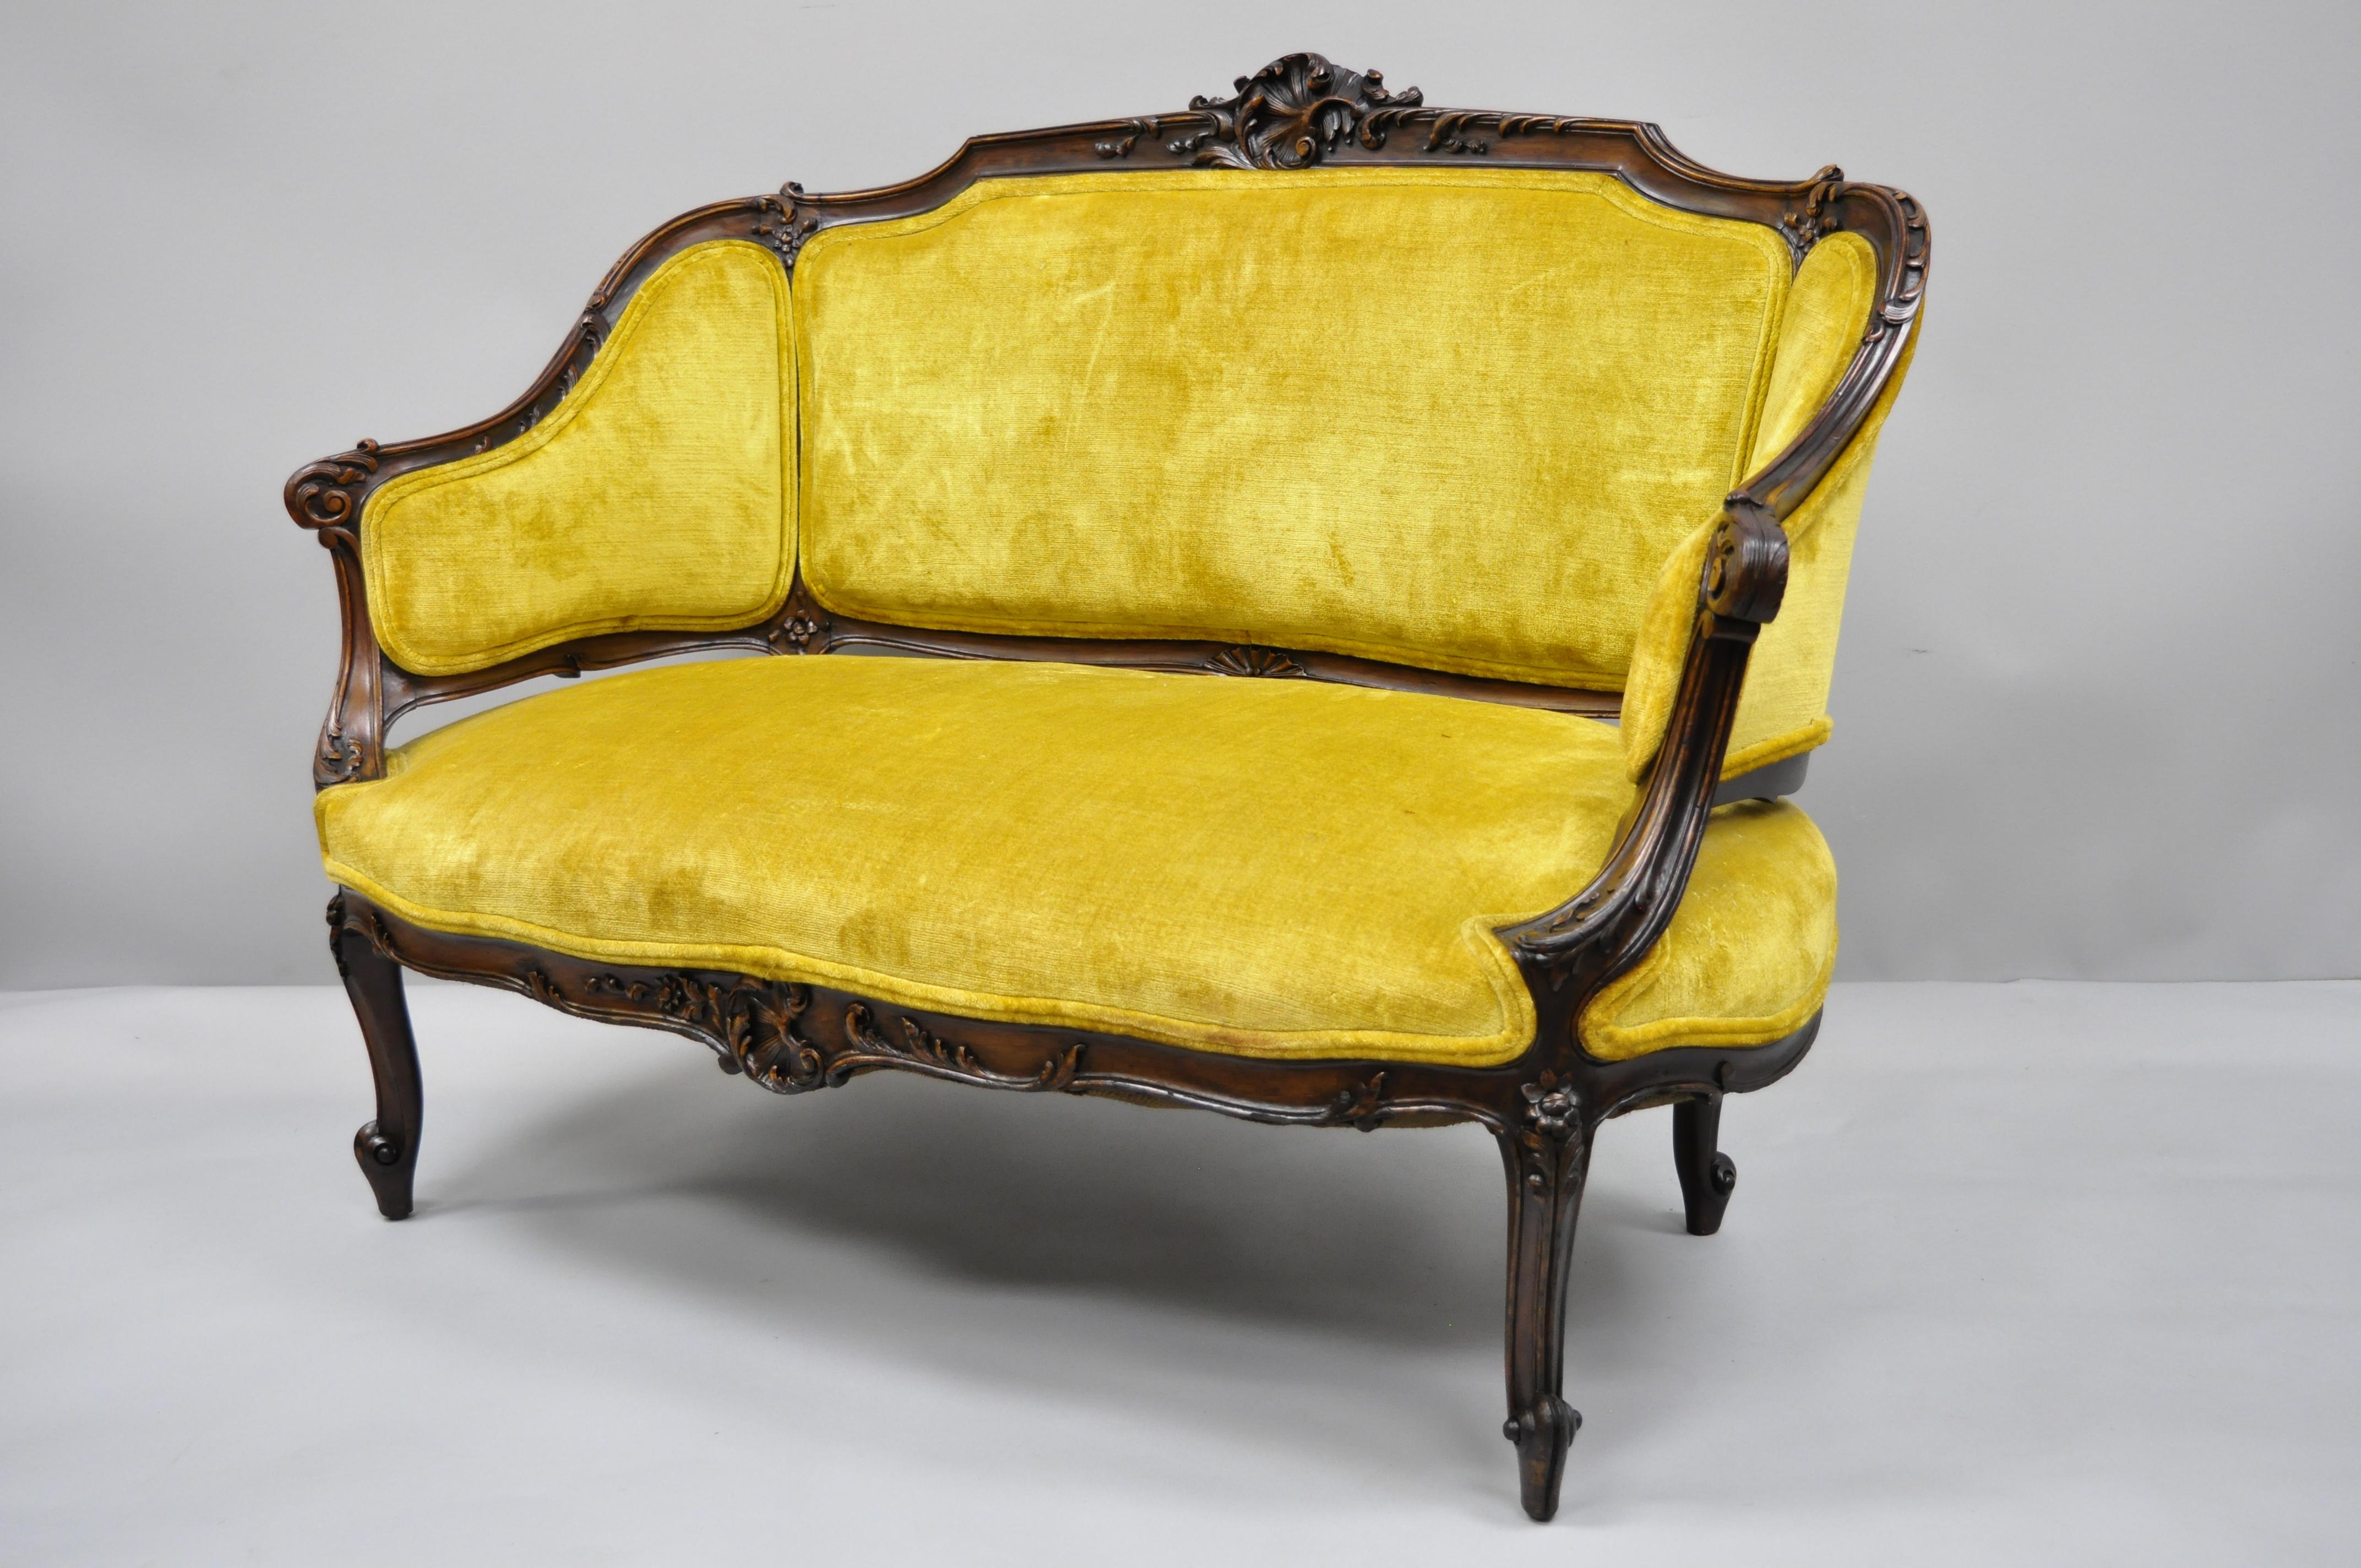 Antique French Louis XV style finely carved mahogany settee loveseat. Item features solid wood frame, beautiful wood grain, nicely carved details, cabriole legs, very nice antique item, circa early 20th century. Measurements: 33